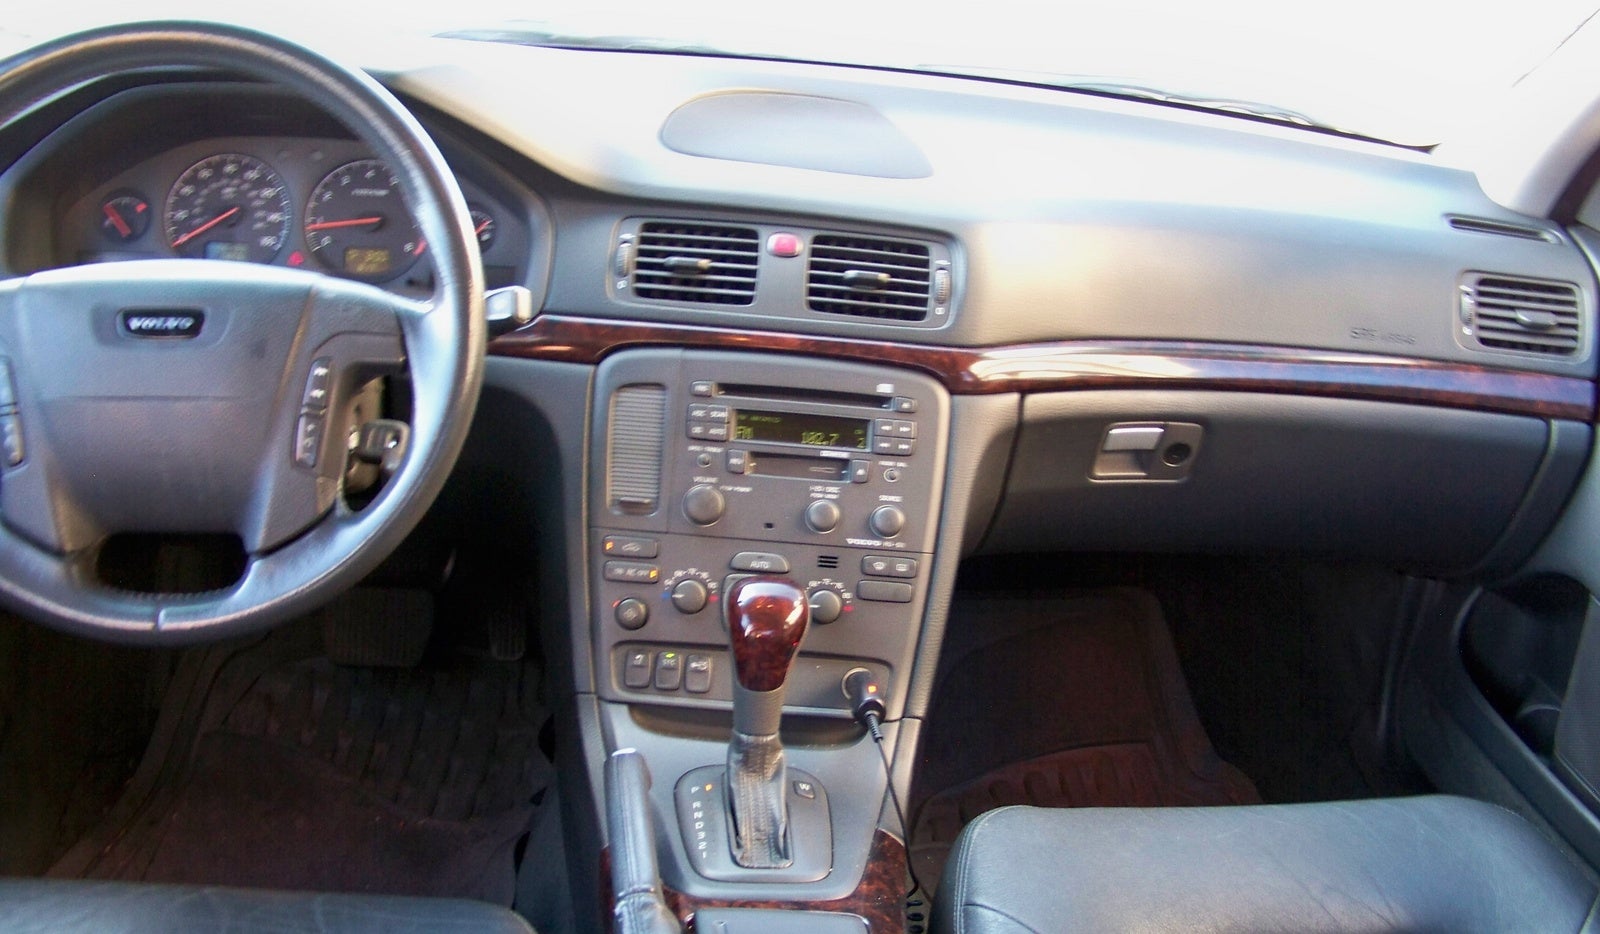 2002 Volvo S80 T6 - Interior Pictures - Picture of 2002 Volvo S80 T6 ...